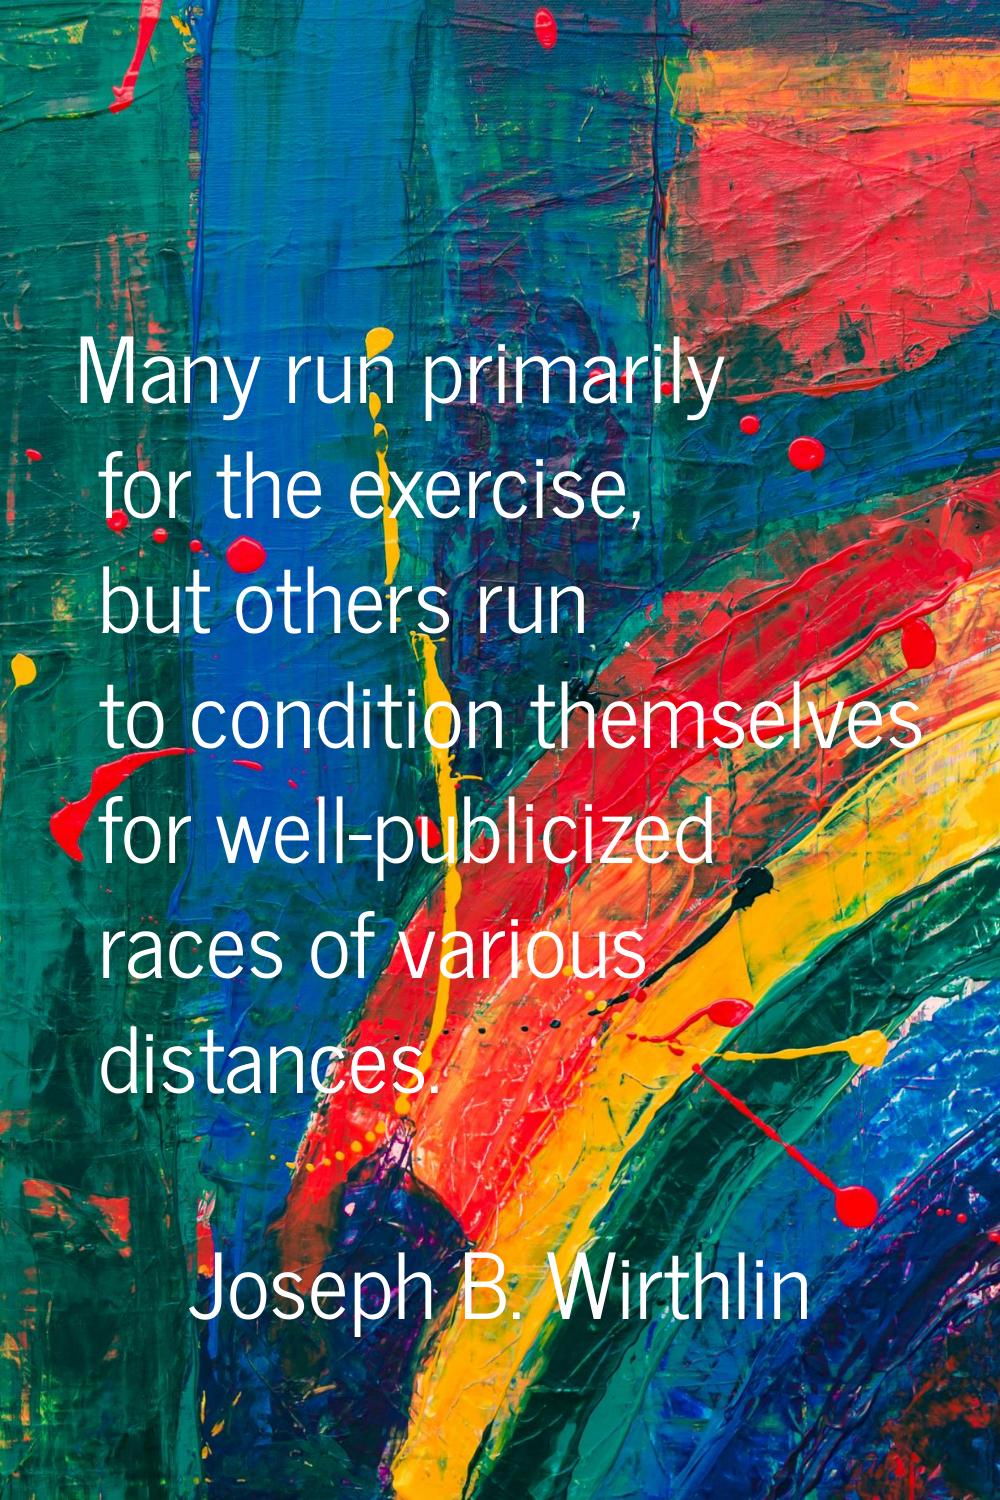 Many run primarily for the exercise, but others run to condition themselves for well-publicized rac